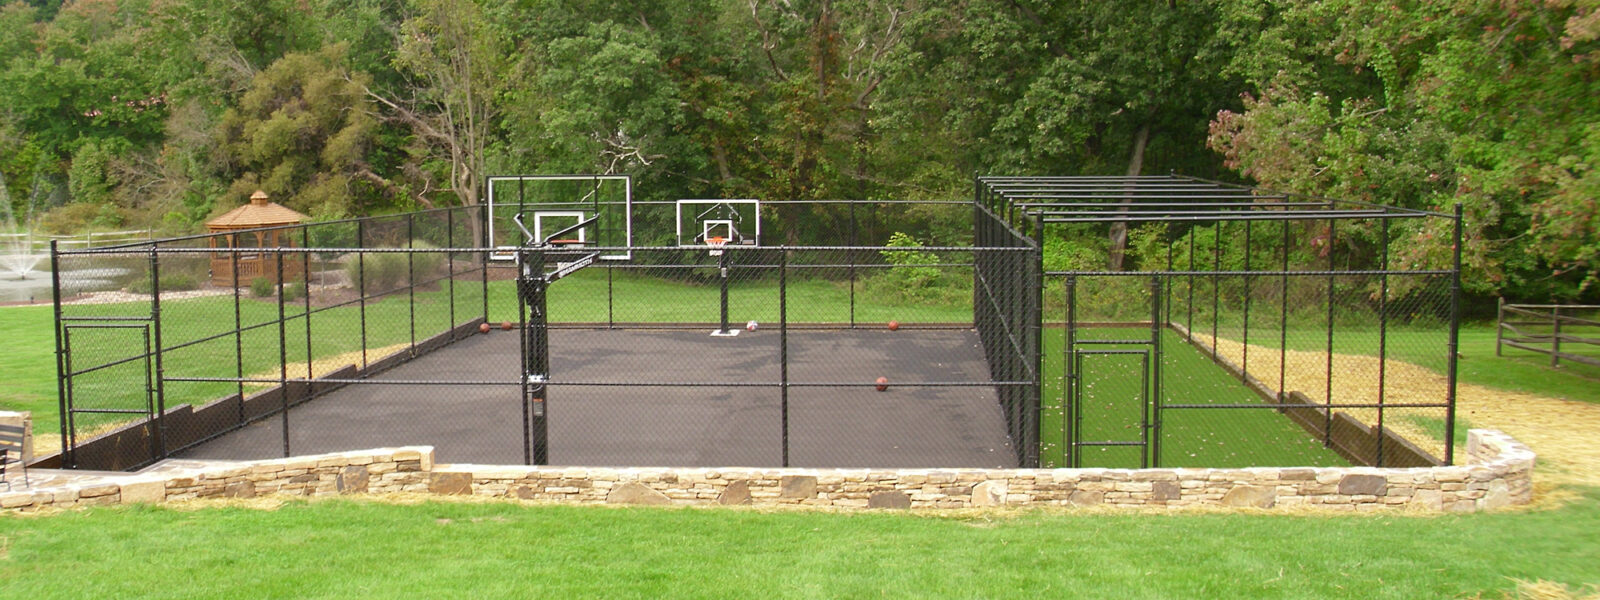 Why is plastic-coated chain link fence used for stadium fencing?